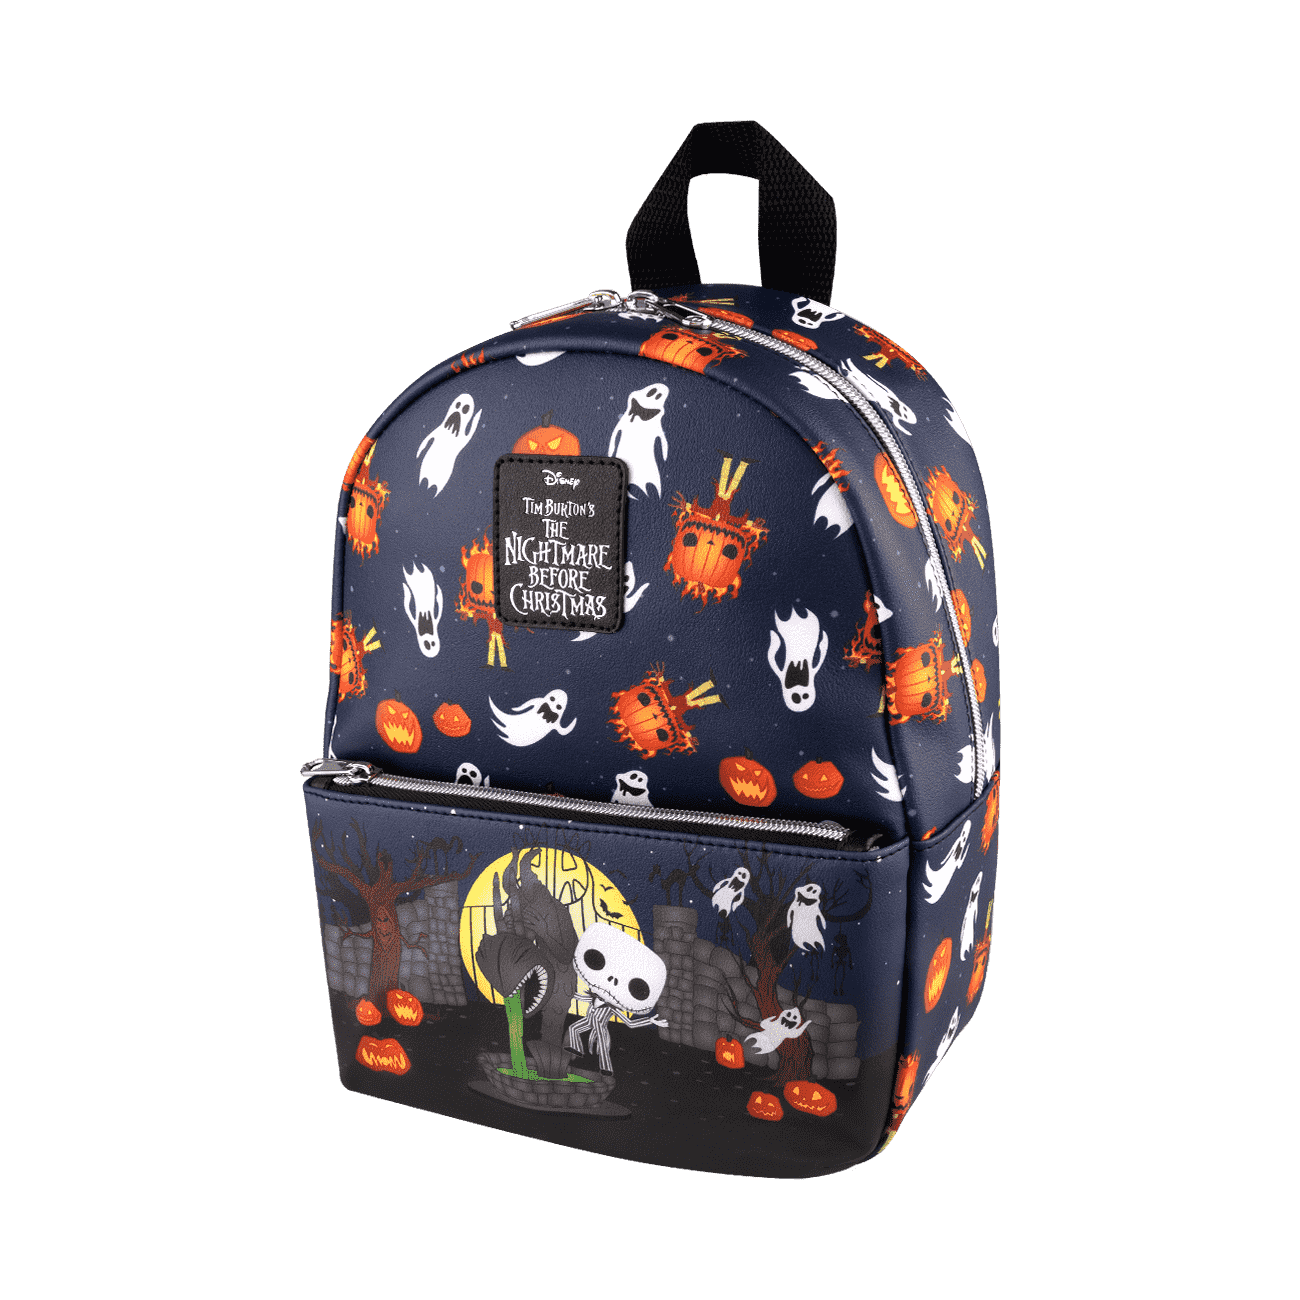 Buy The Nightmare Before Christmas Mini Backpack at Funko.